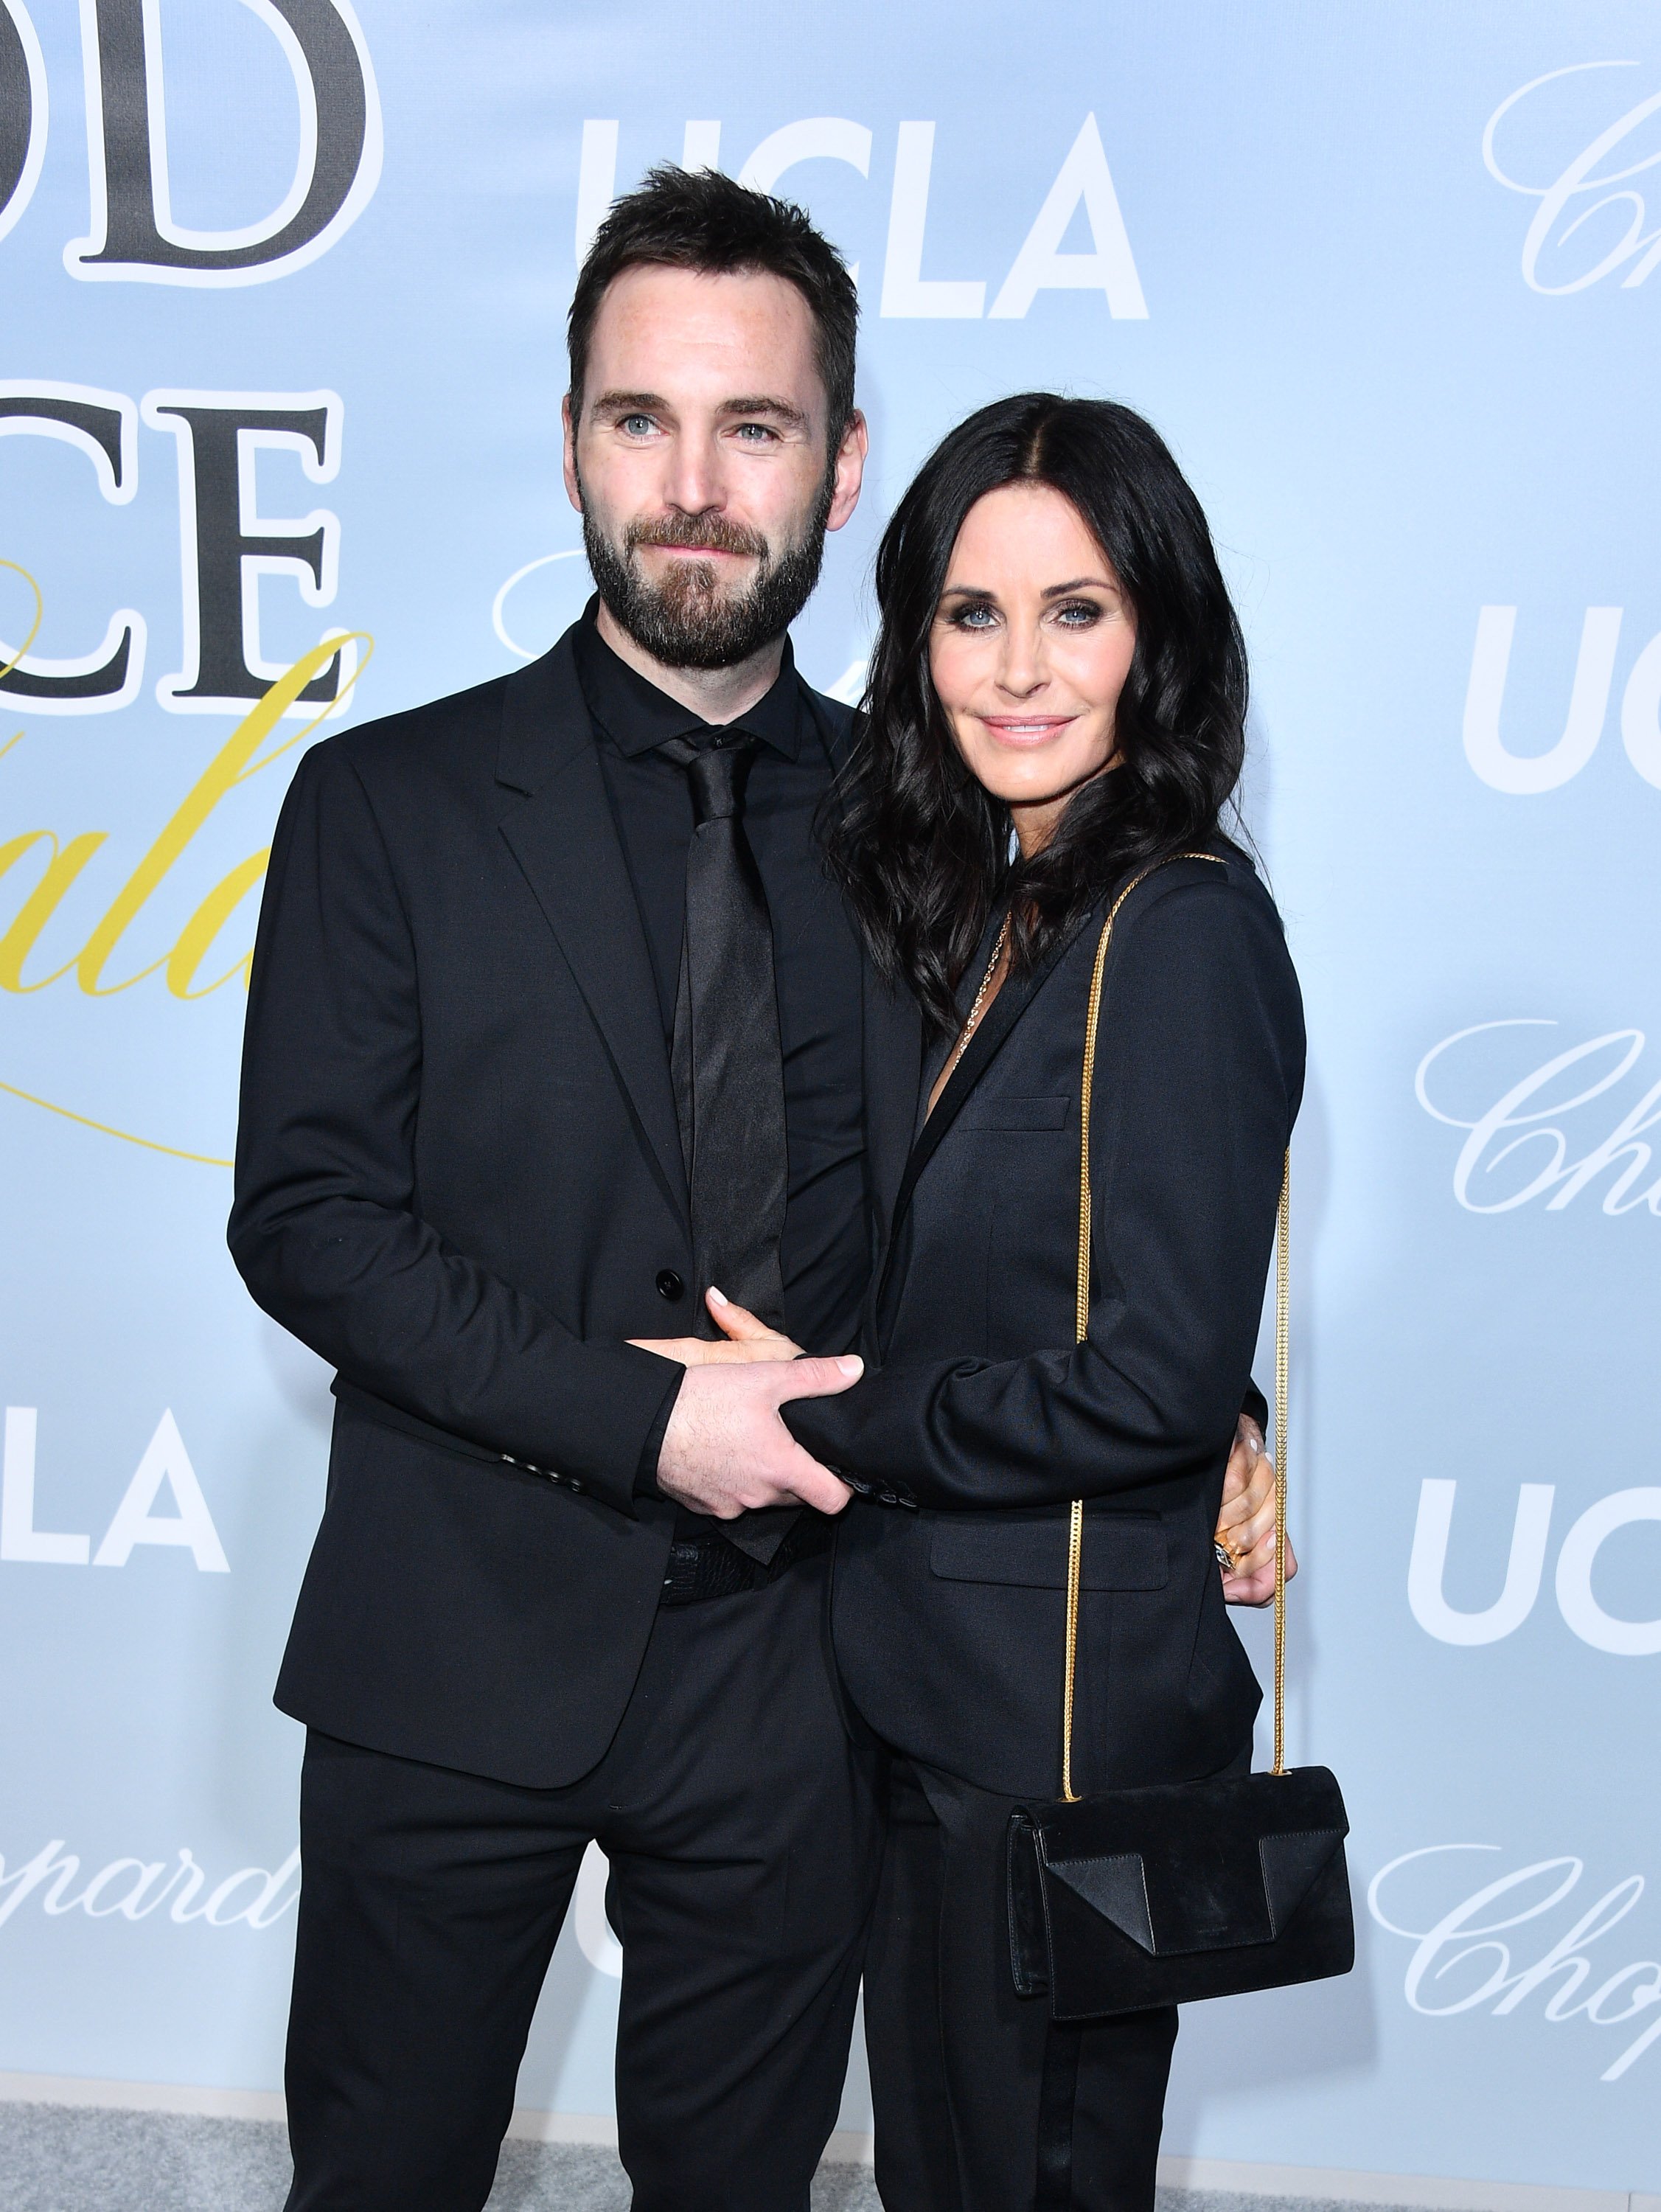 Courteney Cox and Johnny McDaid at the 2019 Hollywood For Science Gala, Los Angeles, California. | Photo: Getty Images